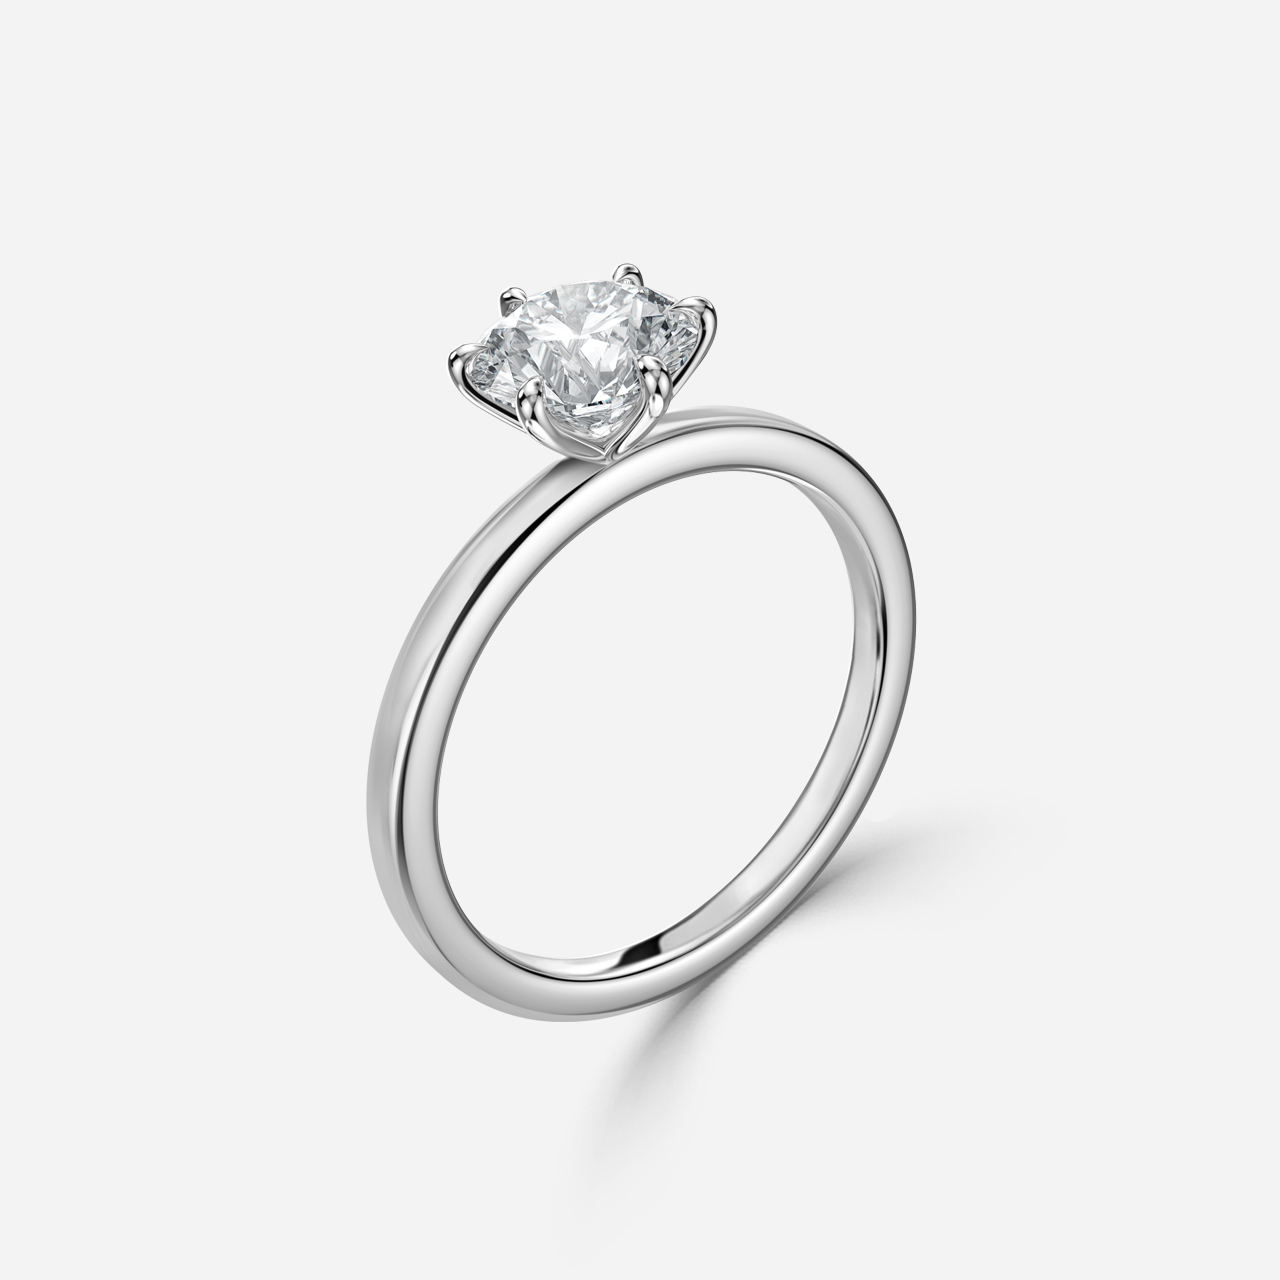 Divya White Gold Solitaire Engagement Ring